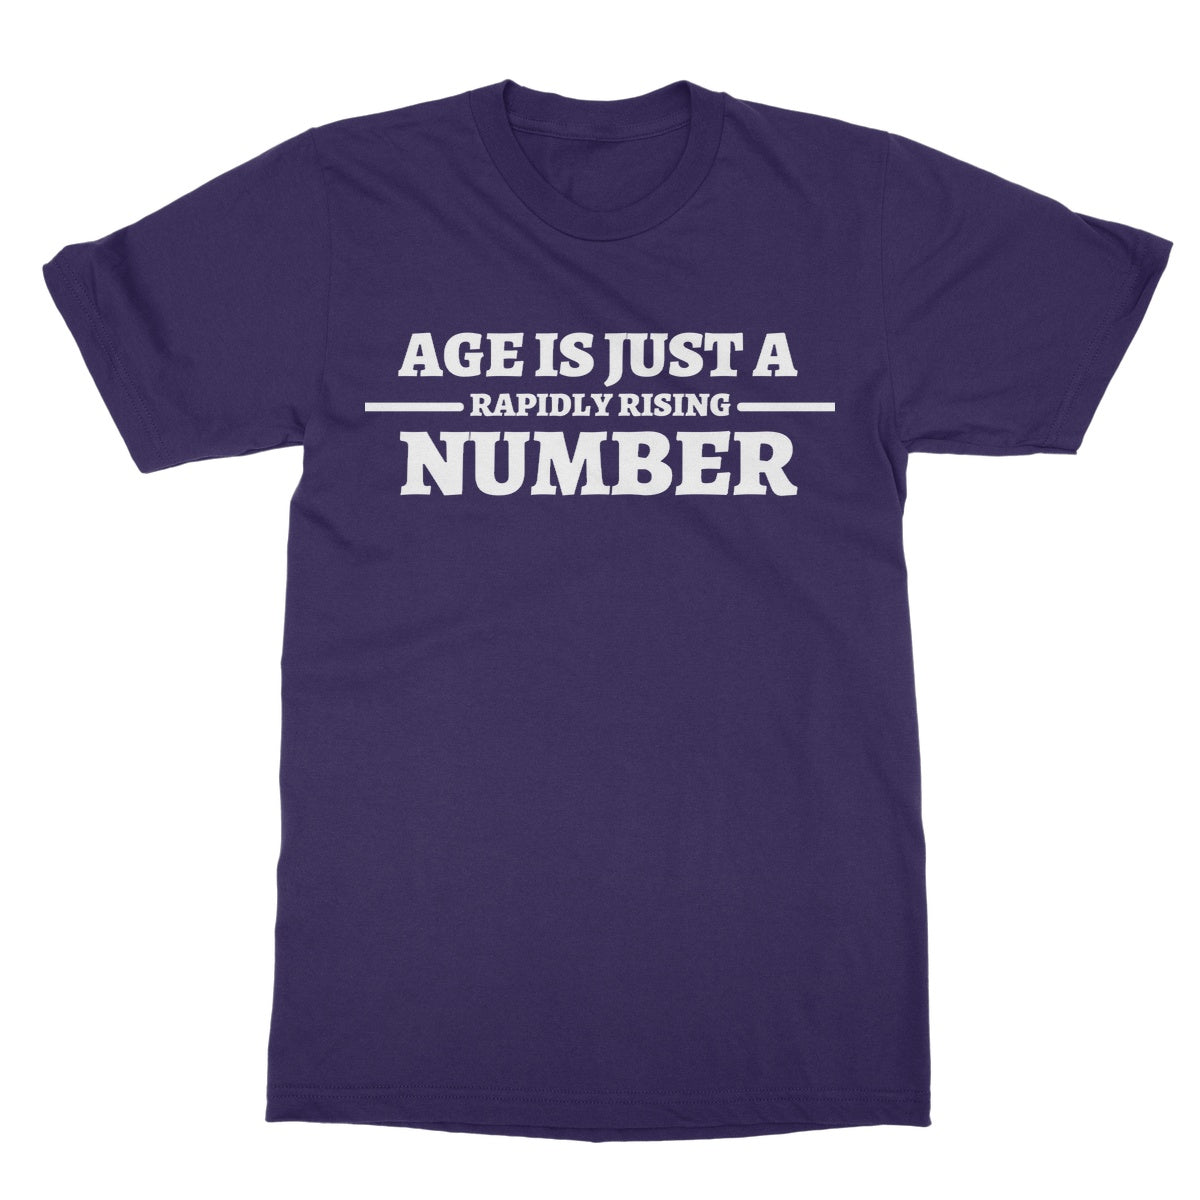 age is just a number t shirt purple